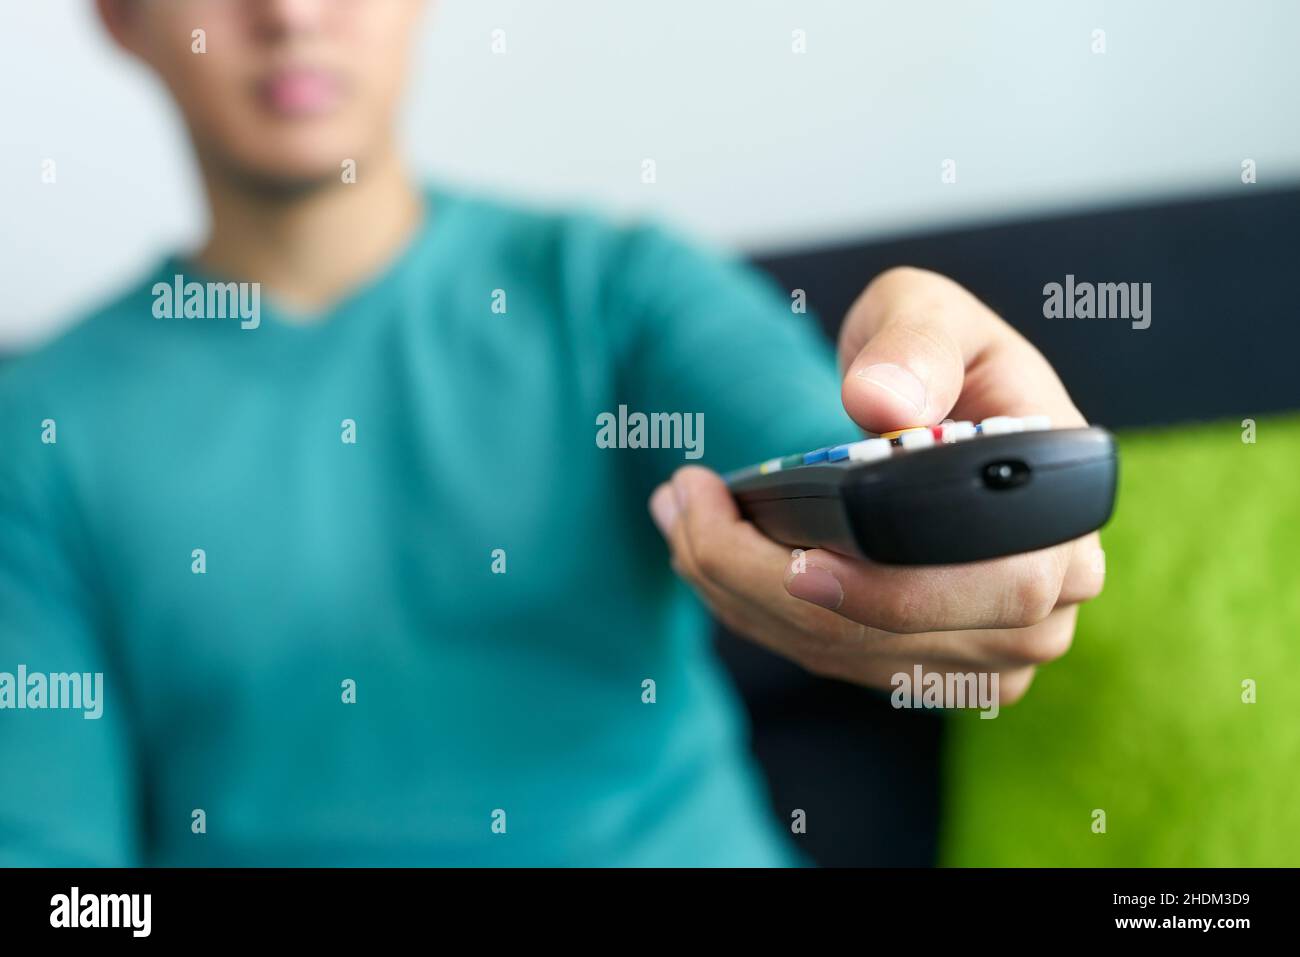 remote control, switching, remote controls Stock Photo